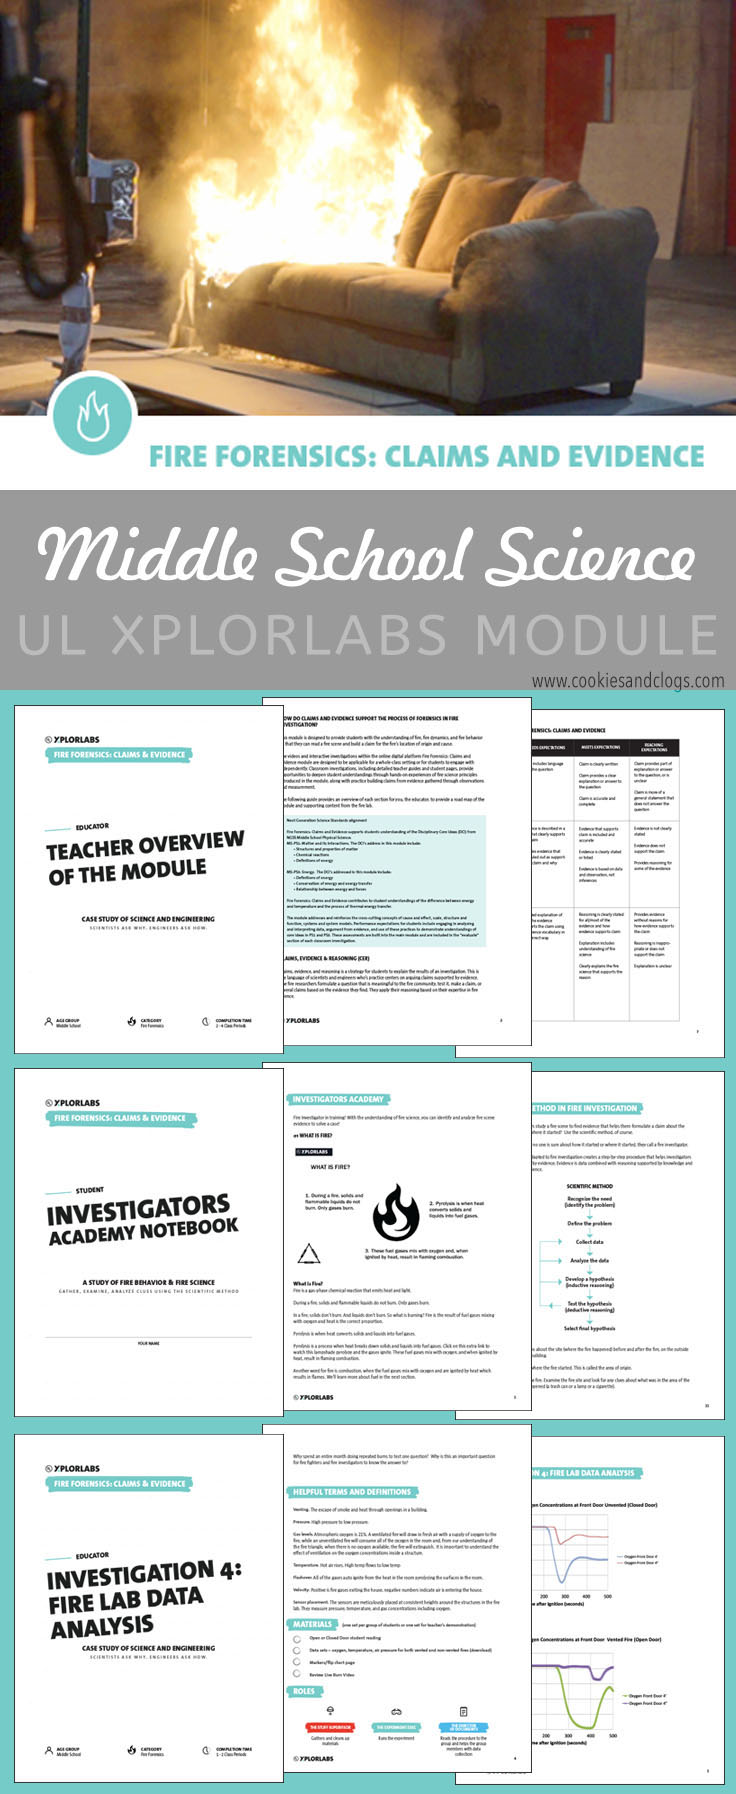 UL Xplorlabs Fire Forensics: Claims and Evidence science STEM classroom or homeschool unit / lesson plan